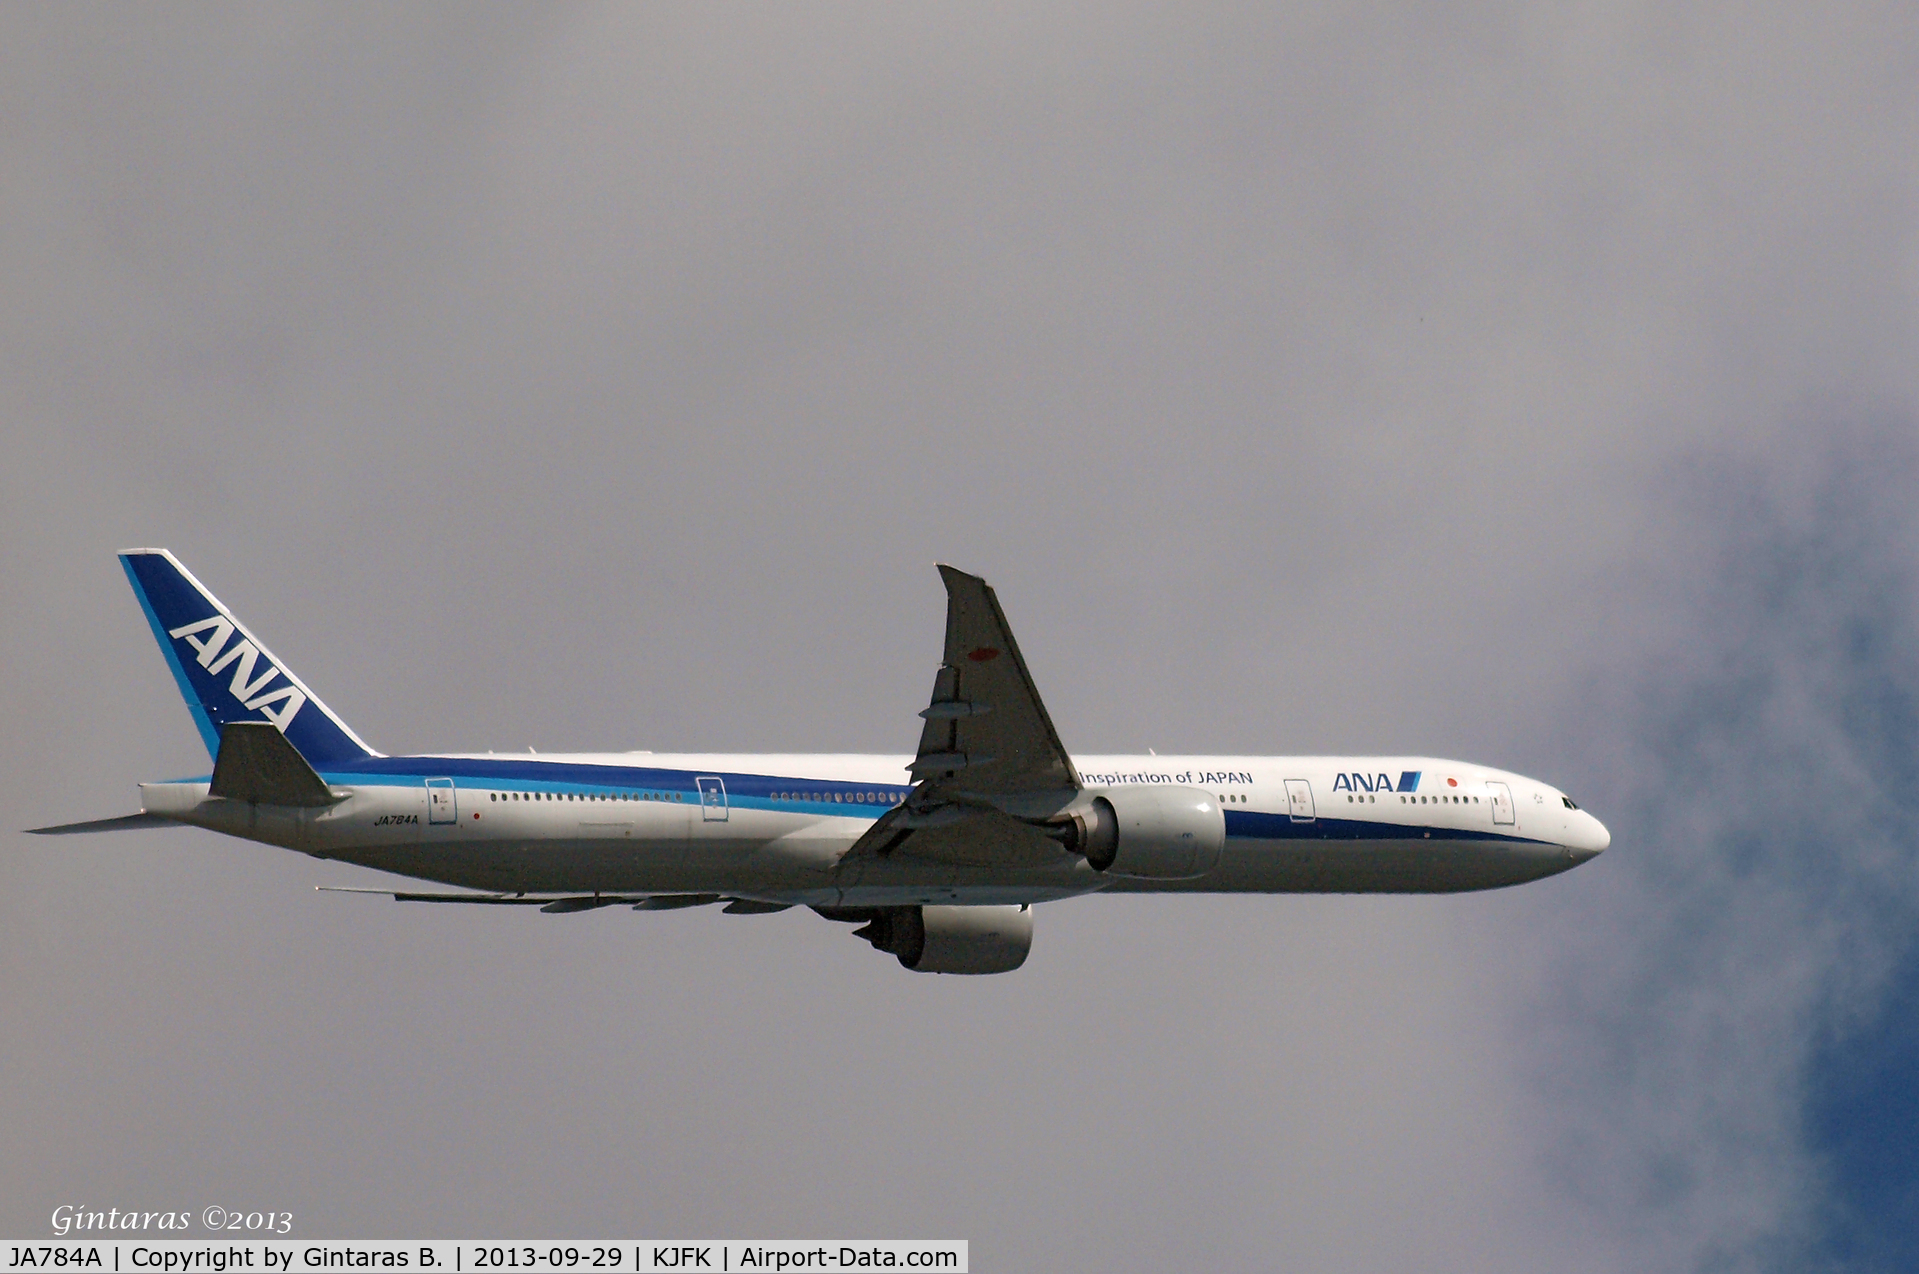 JA784A, 2009 Boeing 777-381/ER C/N 37950, After Take-off from JFK, 13R